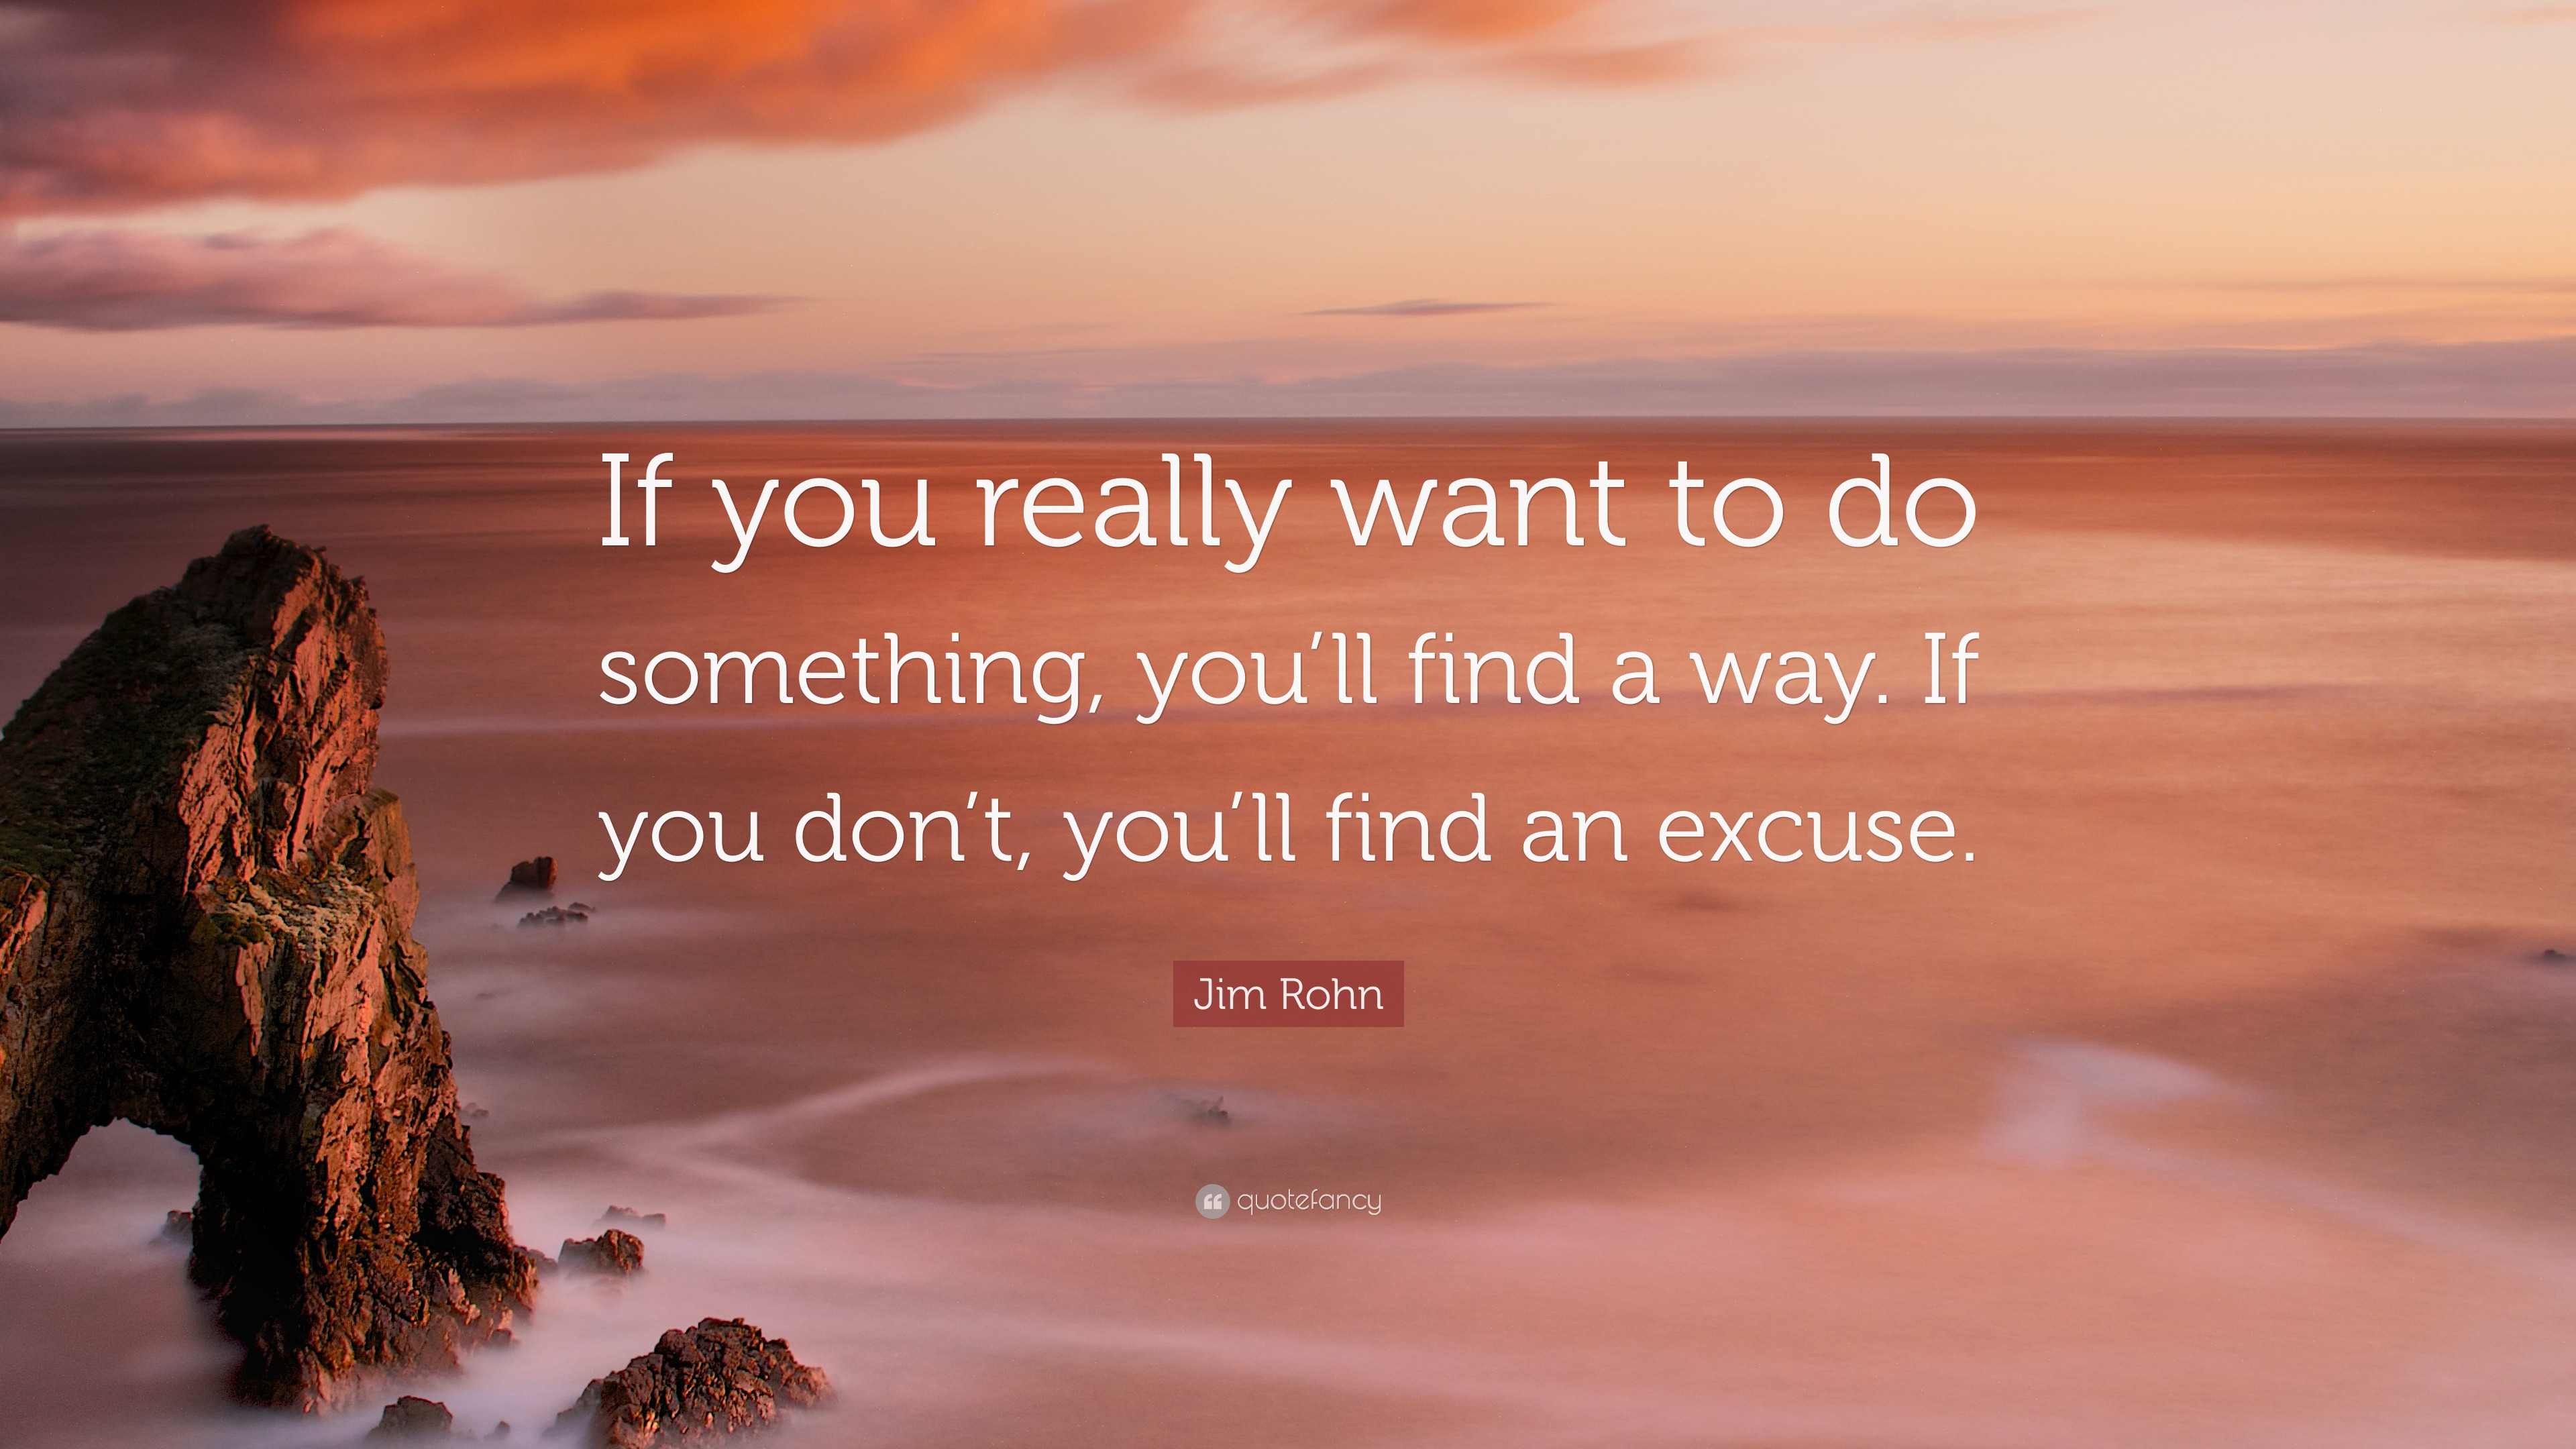 Jim Rohn Quote If You Really Want To Do Something Youll Find A Way If You Dont Youll